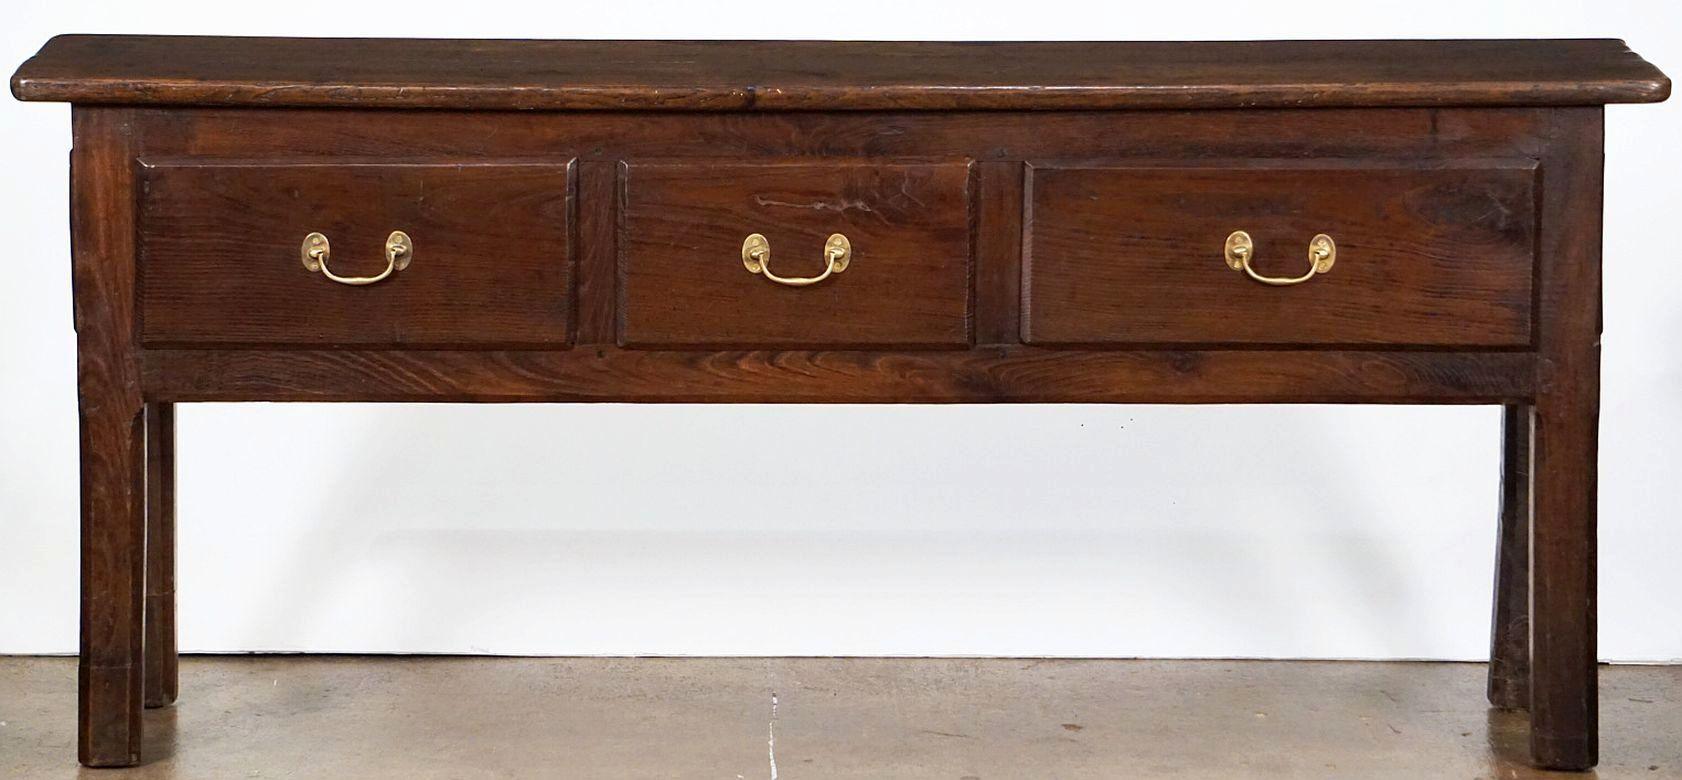 Country French Console Server or Sideboard of Chestnut